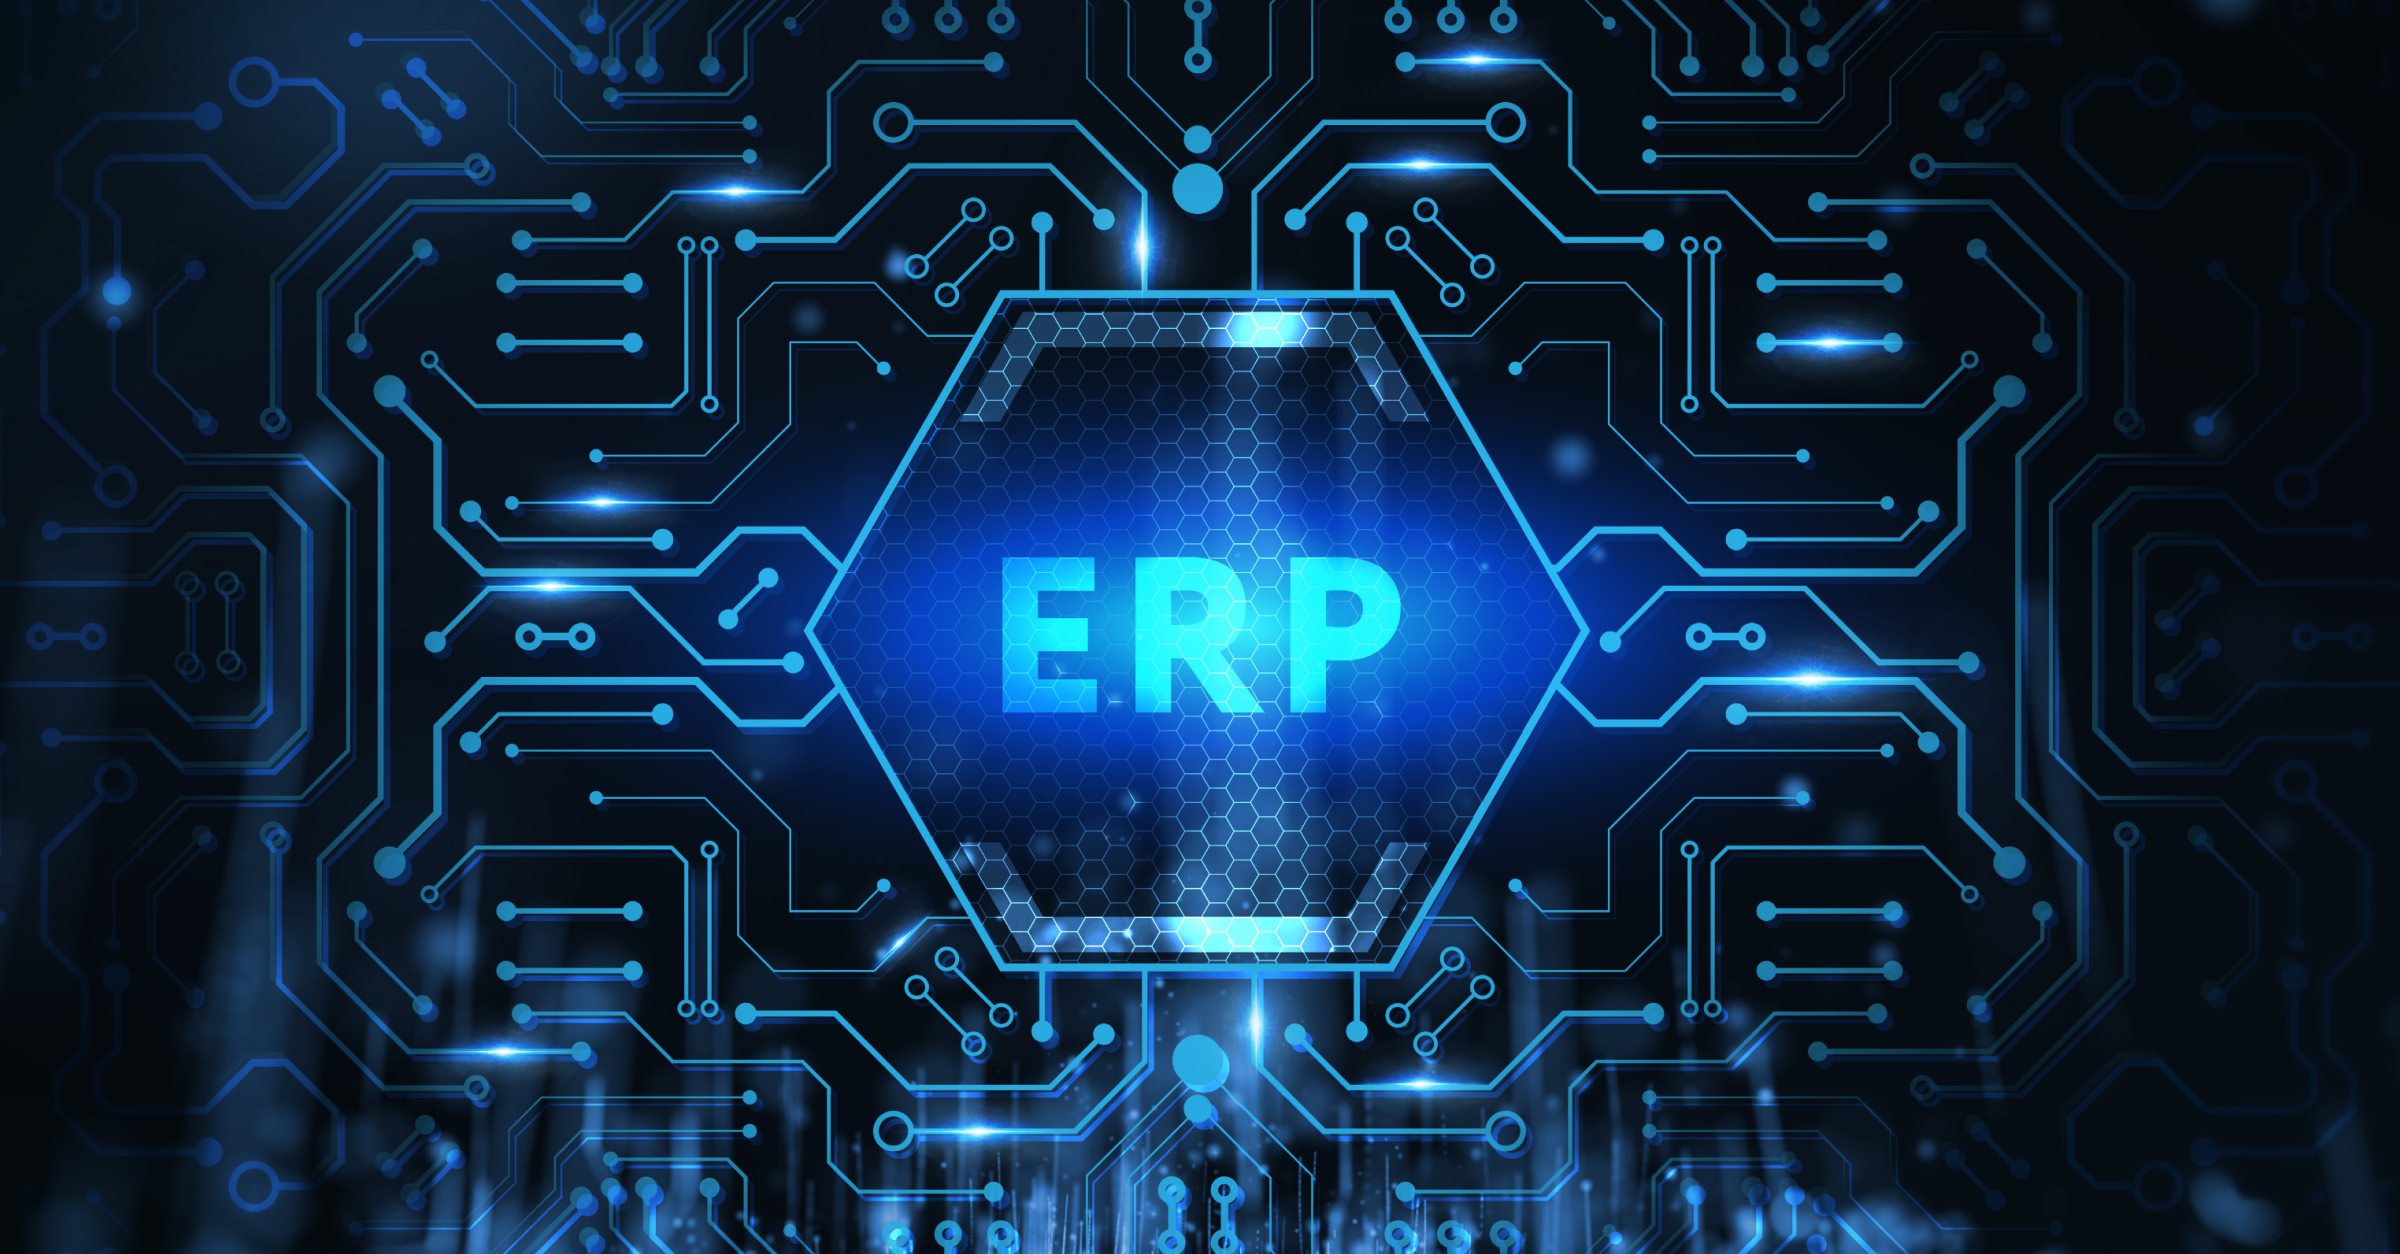 Why Should Tech Leaders Care About ERP?